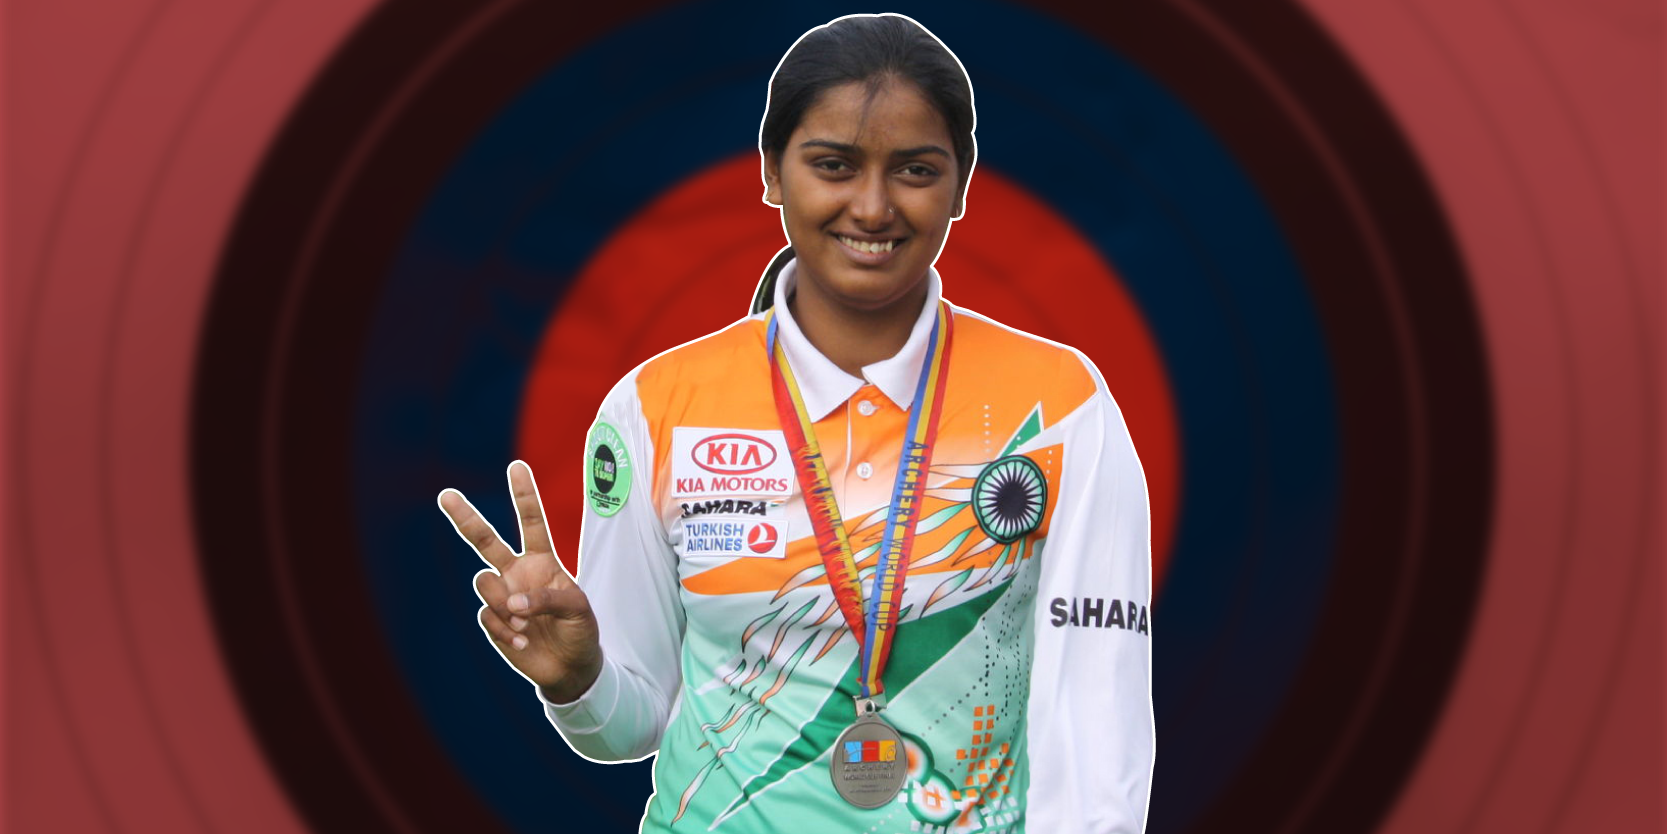 Everything you want to know about India’s most celebrated female archer Deepika Kumari